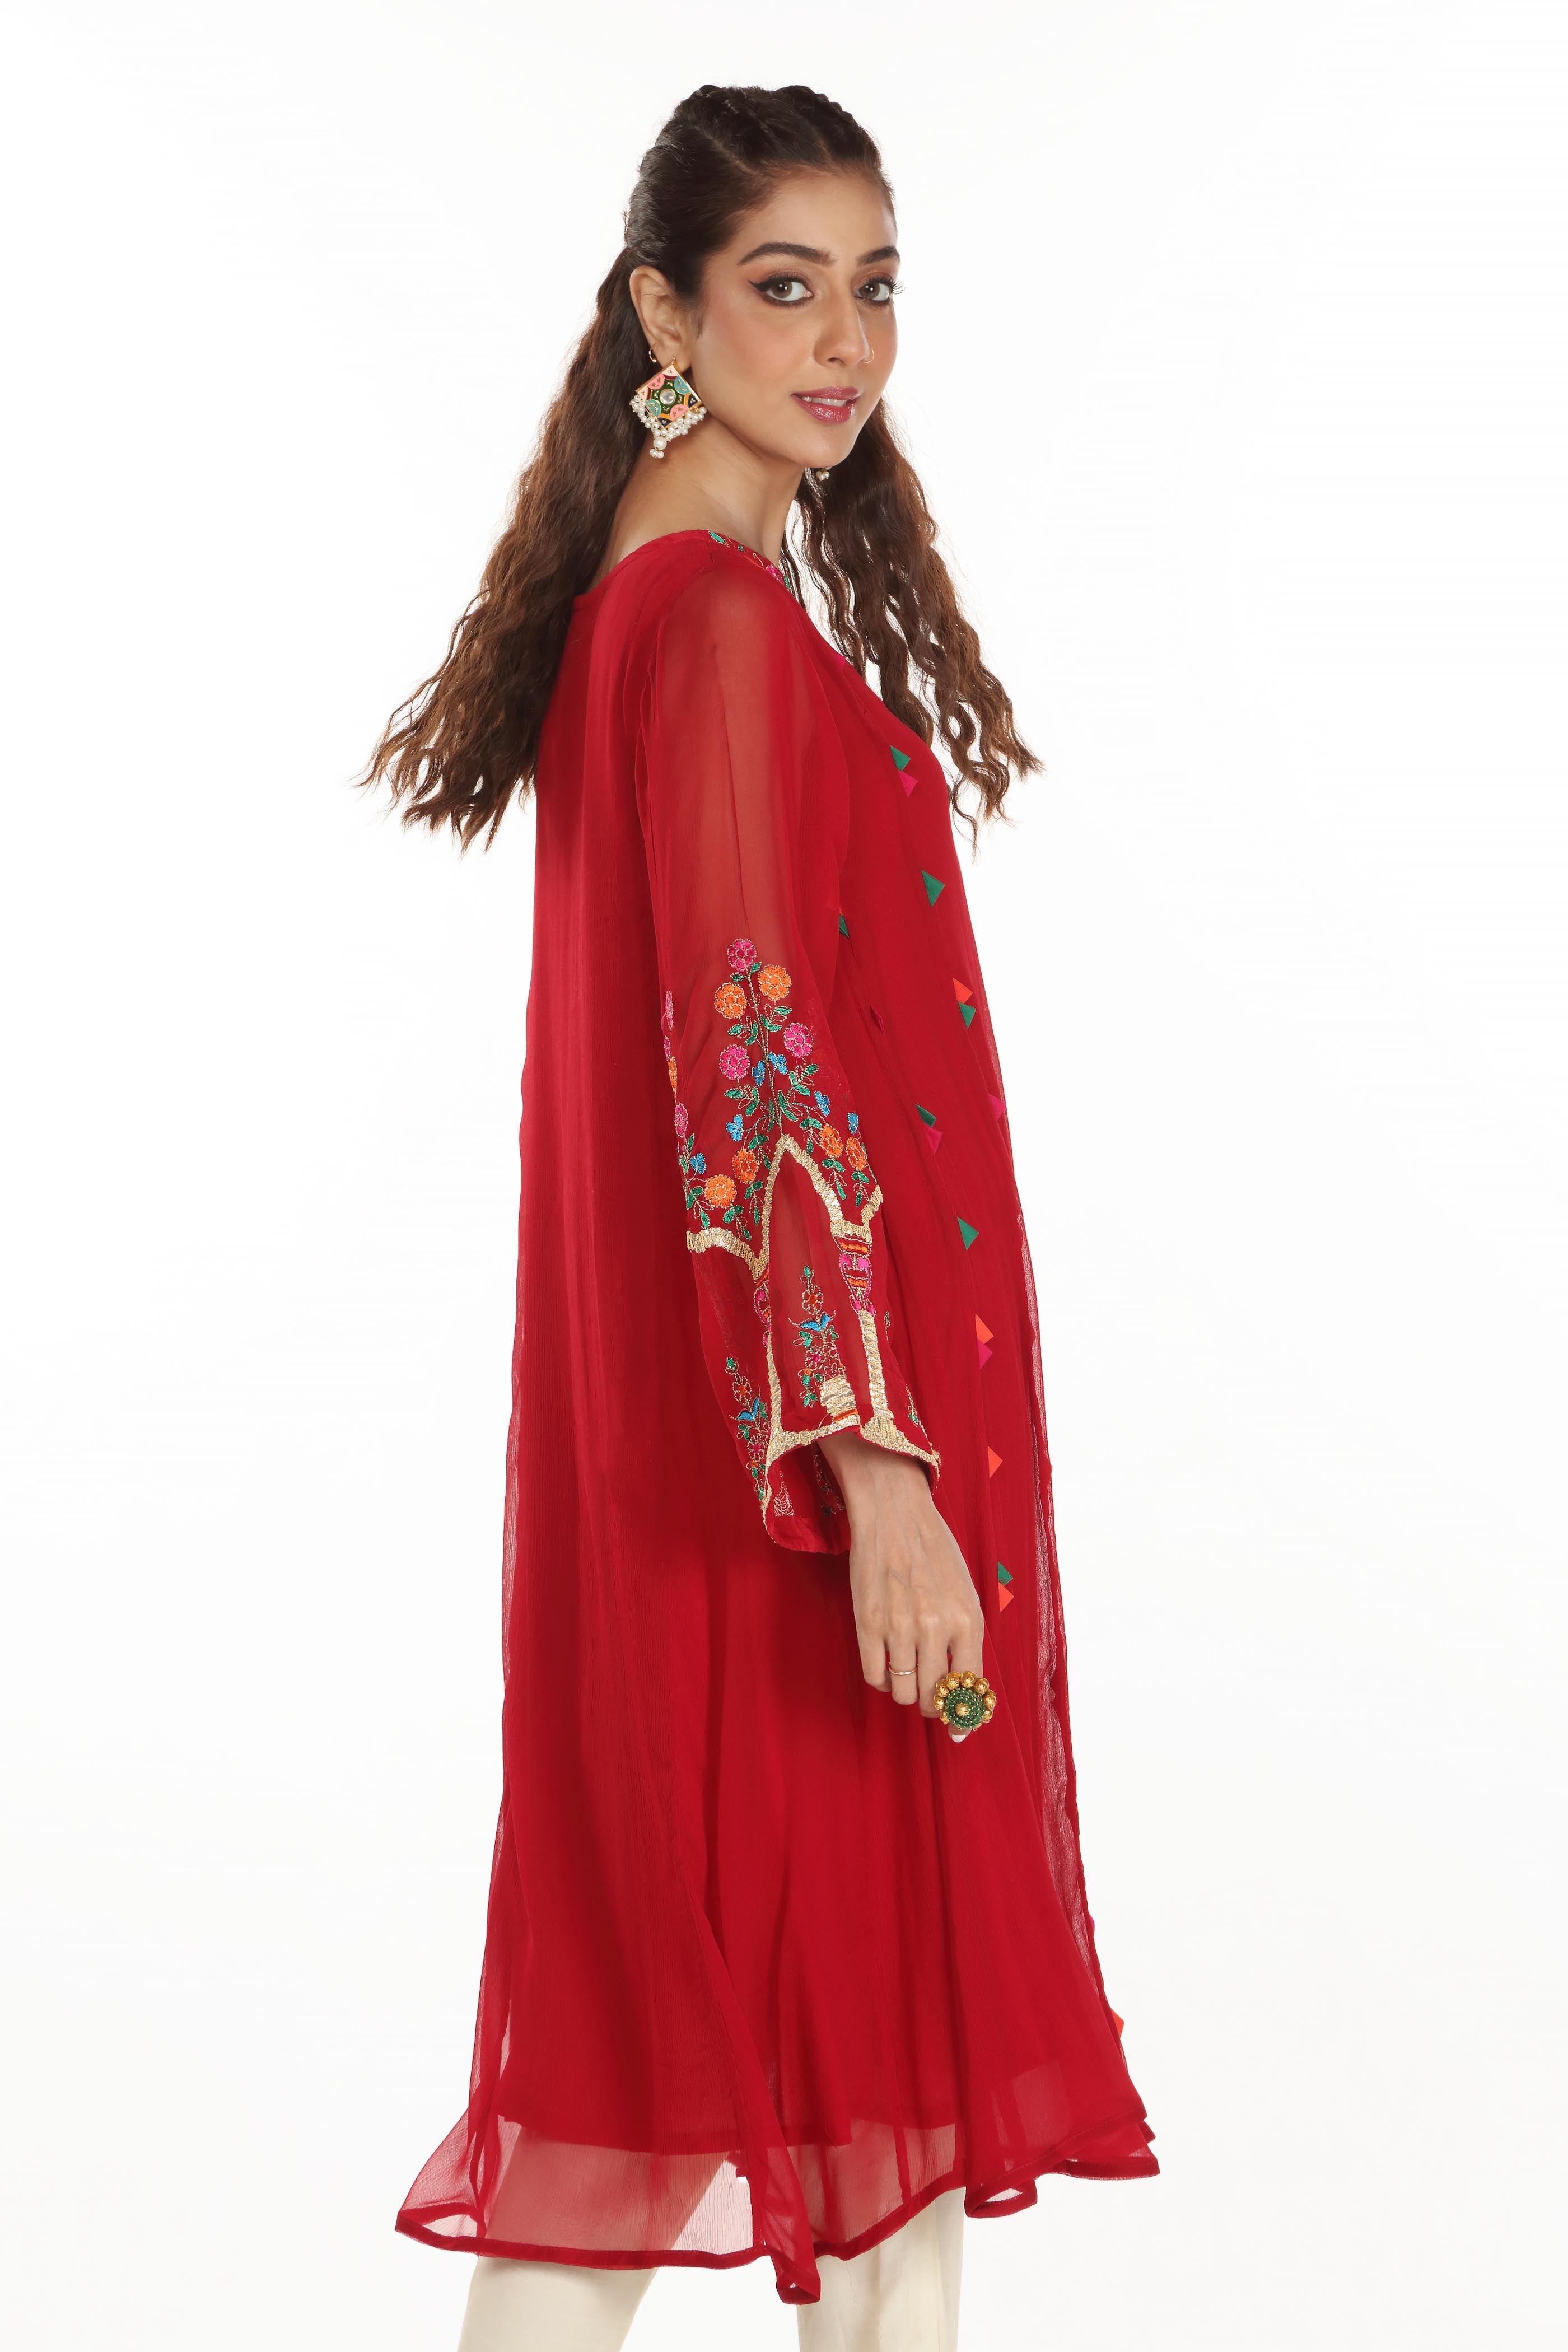 Red Mehrab 1 in Red coloured Printed Lawn fabric 3